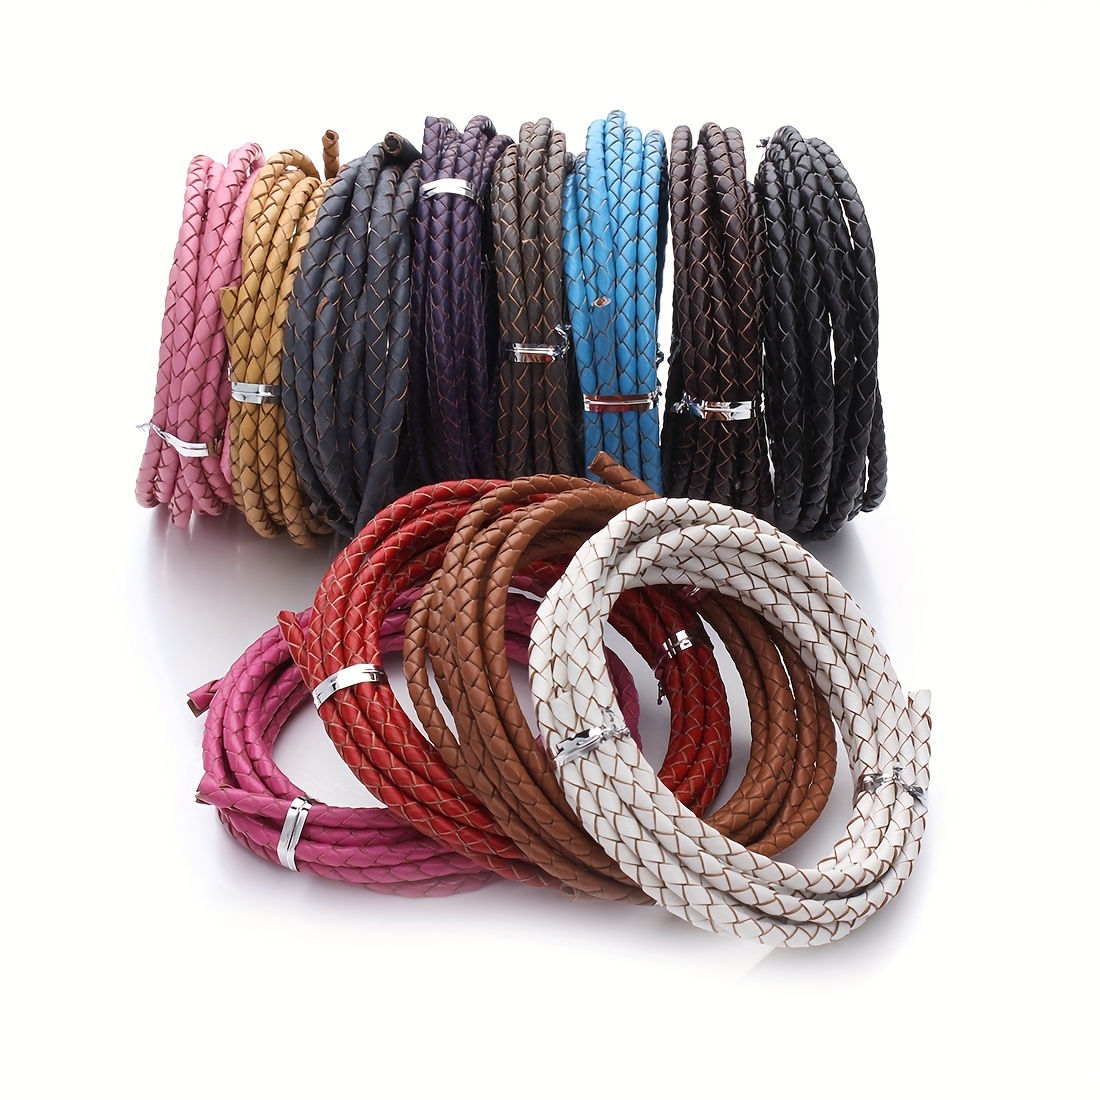  Fun-Weevz 10 Meters of 2mm Square Leather Cord for